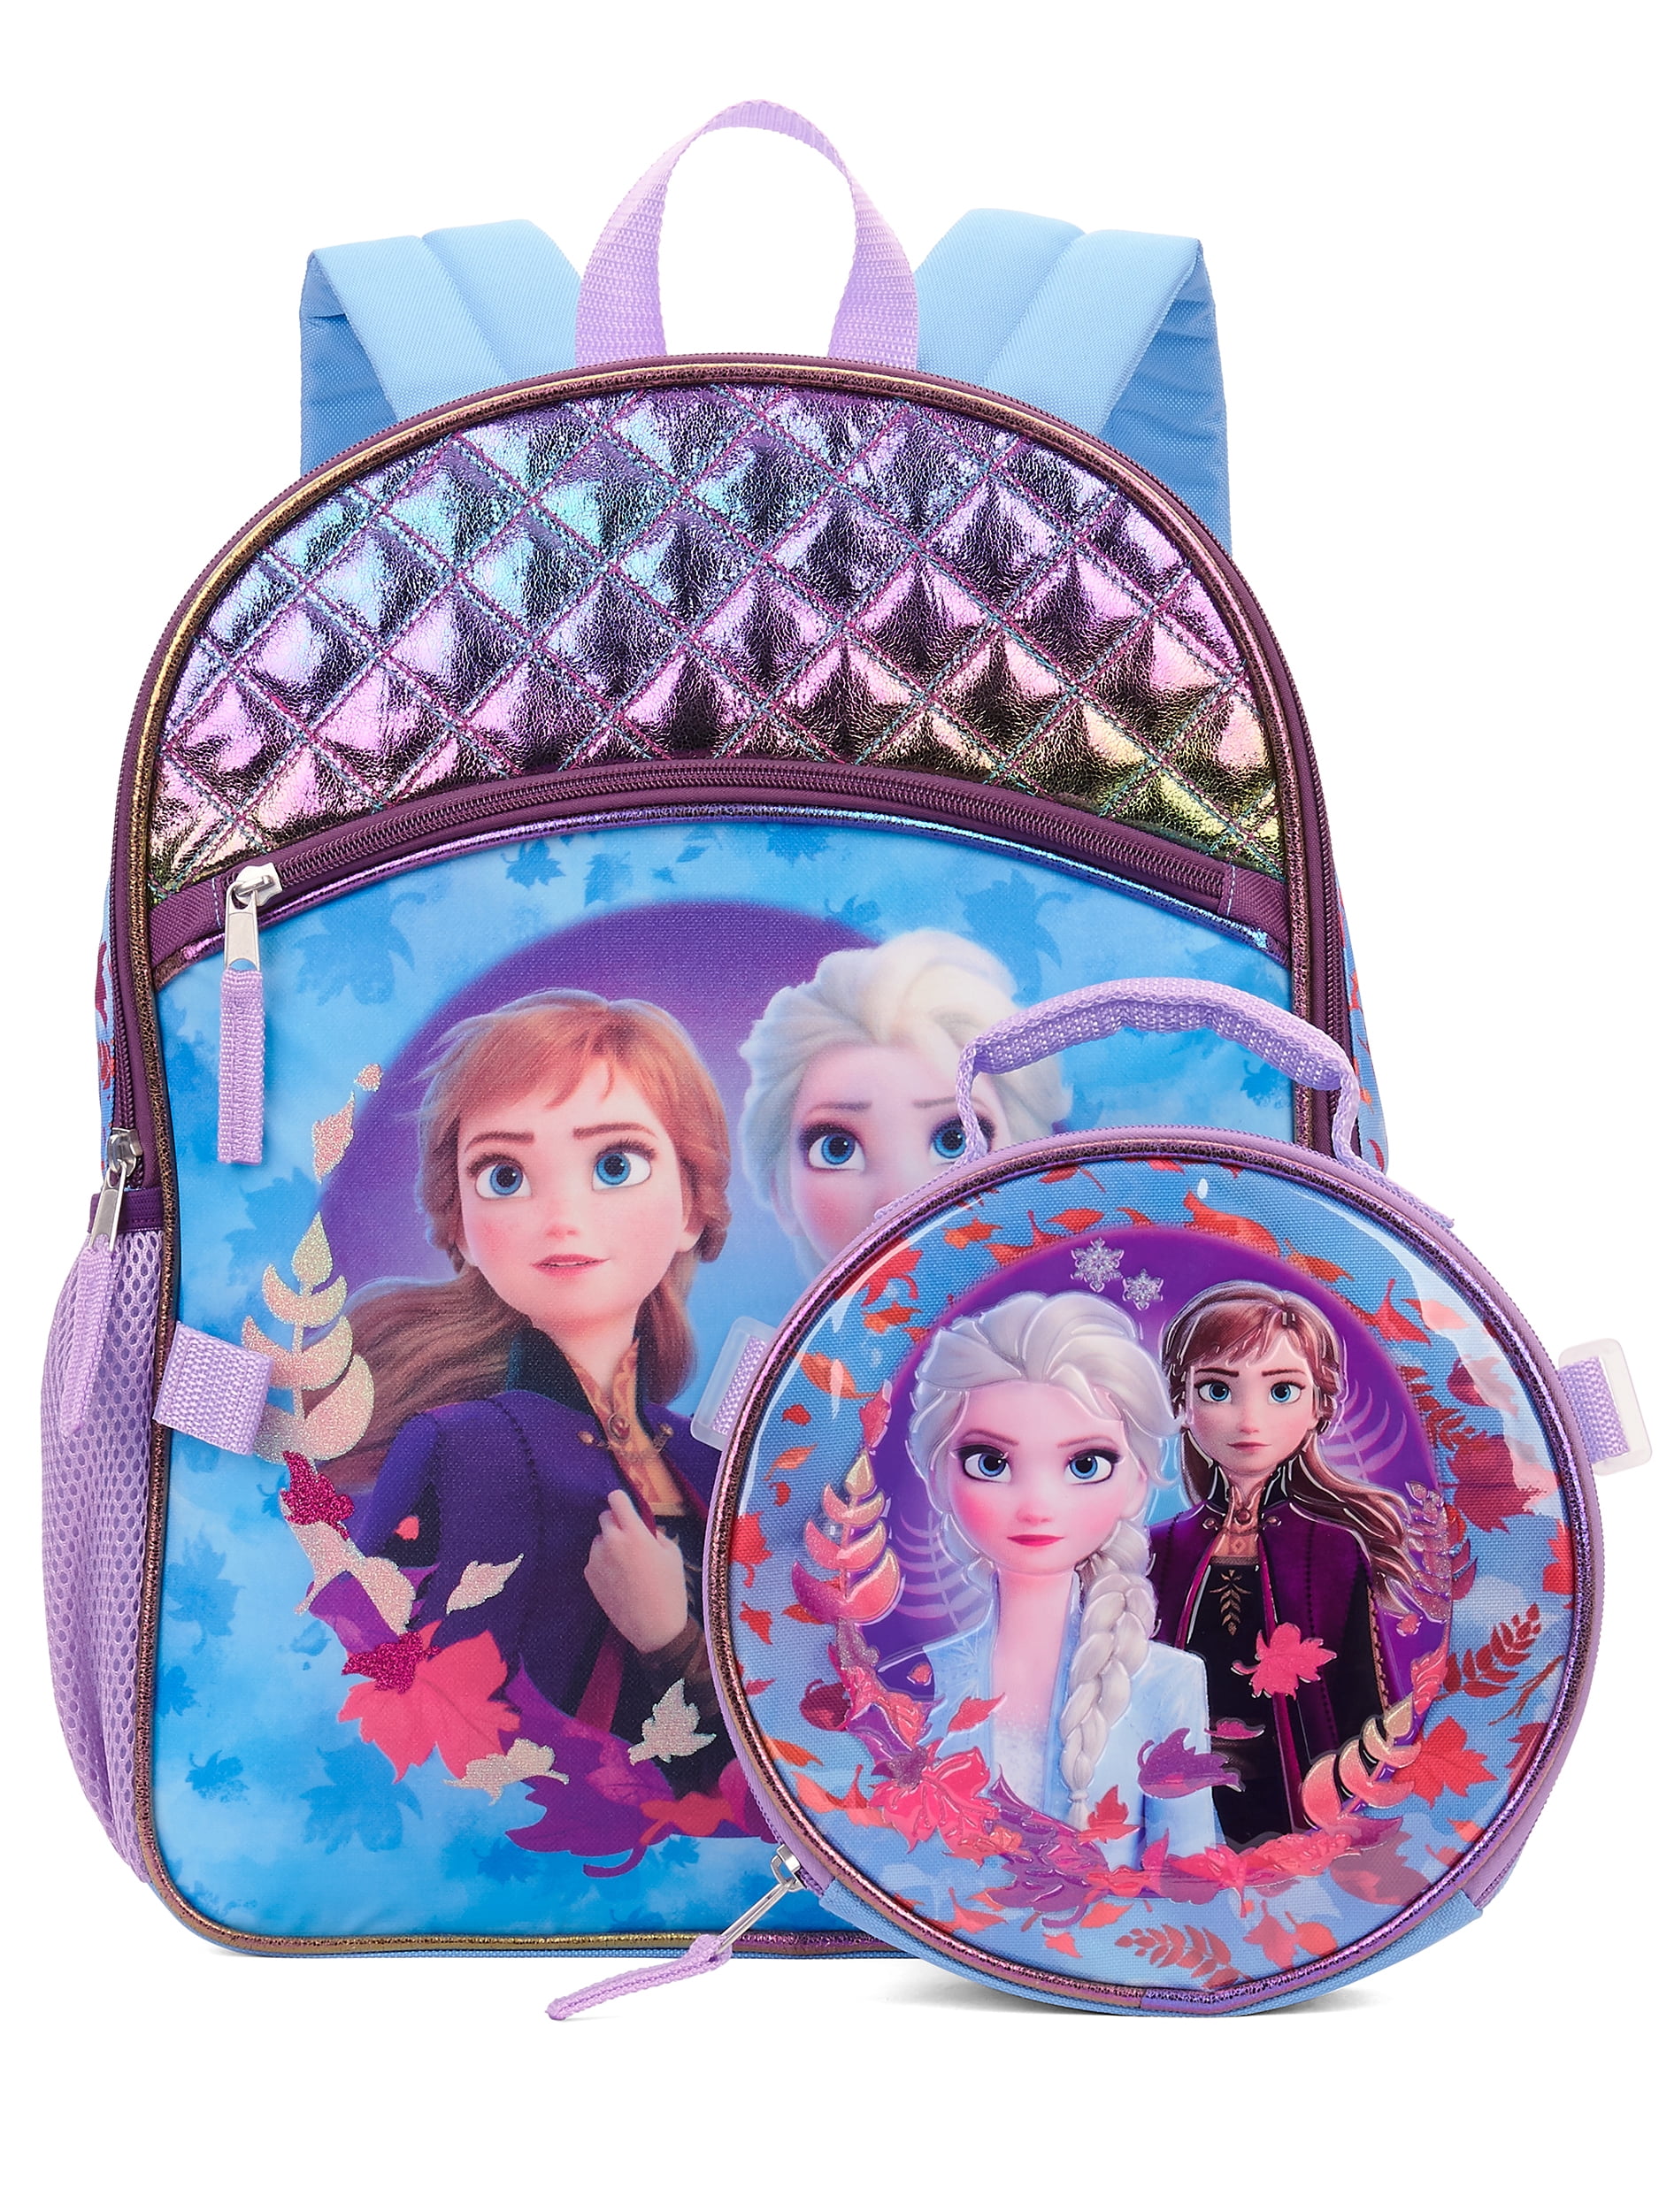 New Disney Girl's Frozen 2 Believe the Journey Anna and Elsa 11-Inch Backpack 